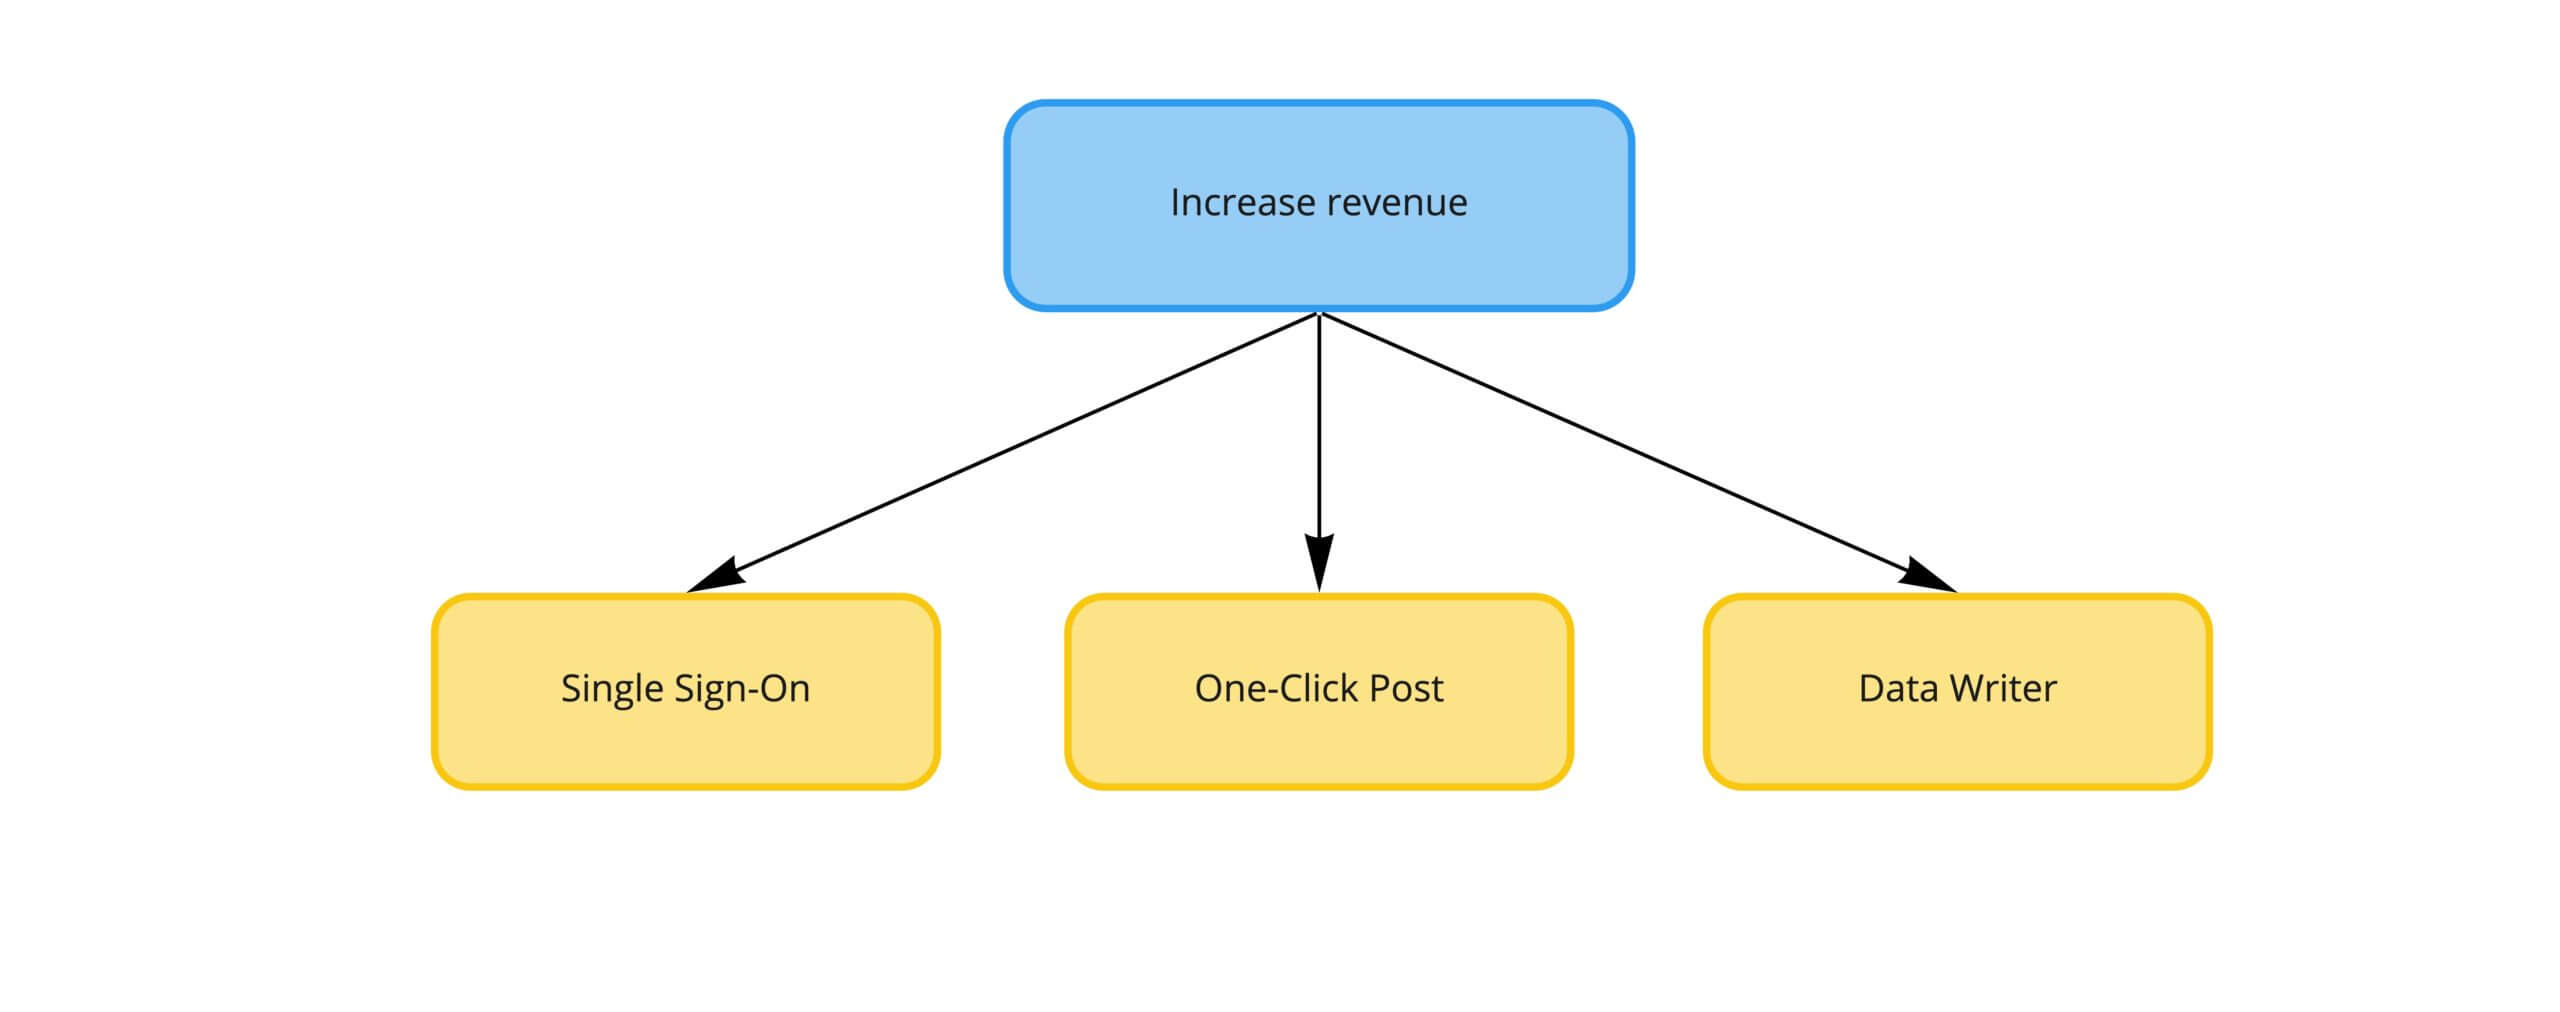 A very simple opportunity solution tree diagram. The outcome at the top "Increase revenue" is branching into three solution ideas: single sign-on, one-click post, and data writer.